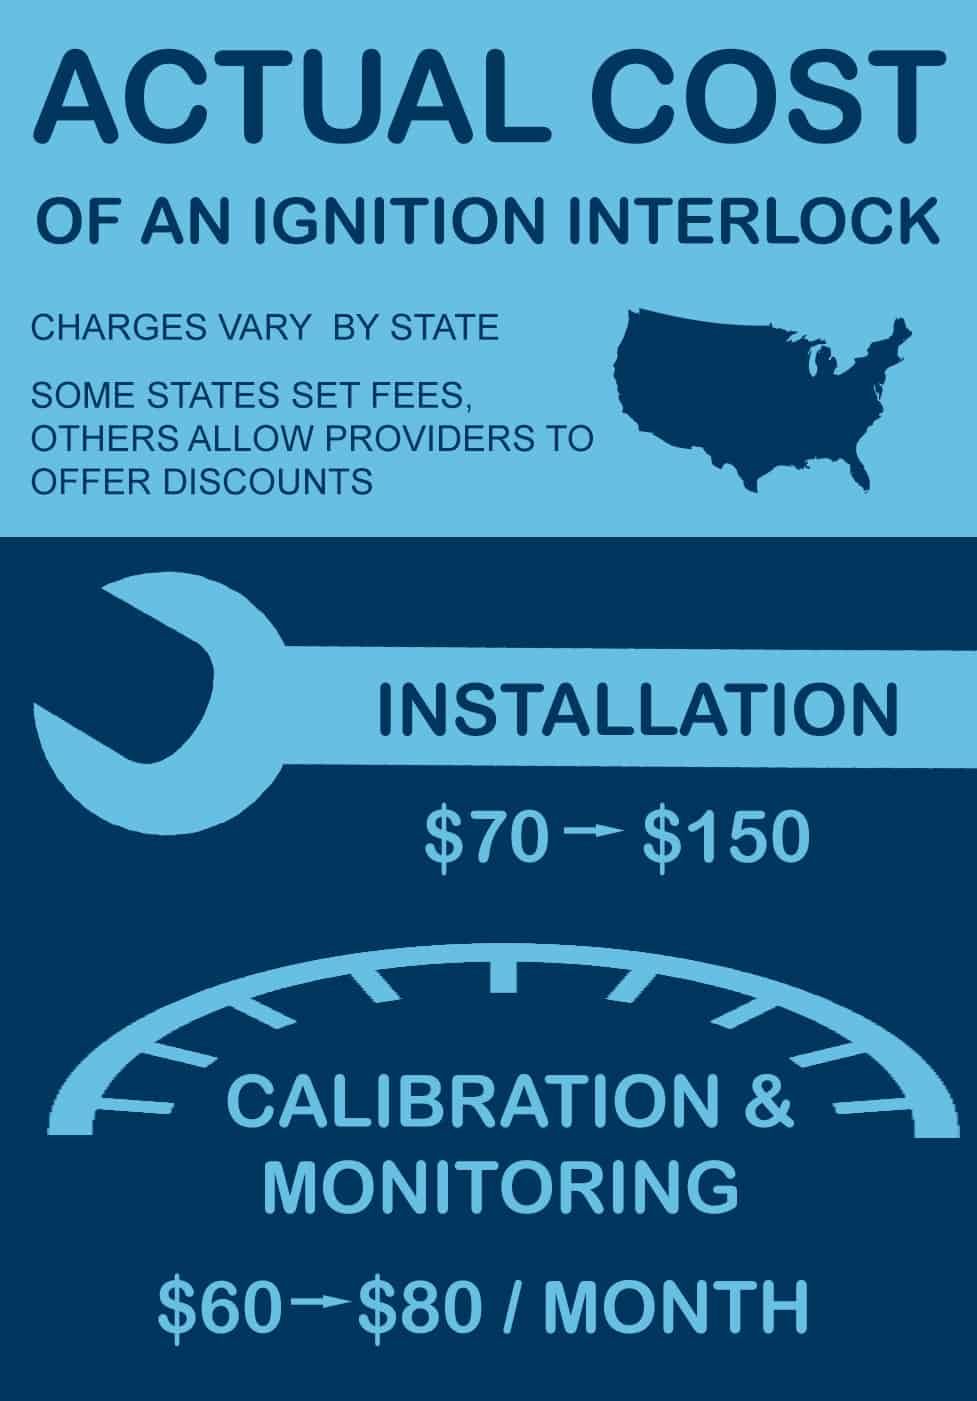 Breaking Down The Cost Of The Ignition Interlock Device